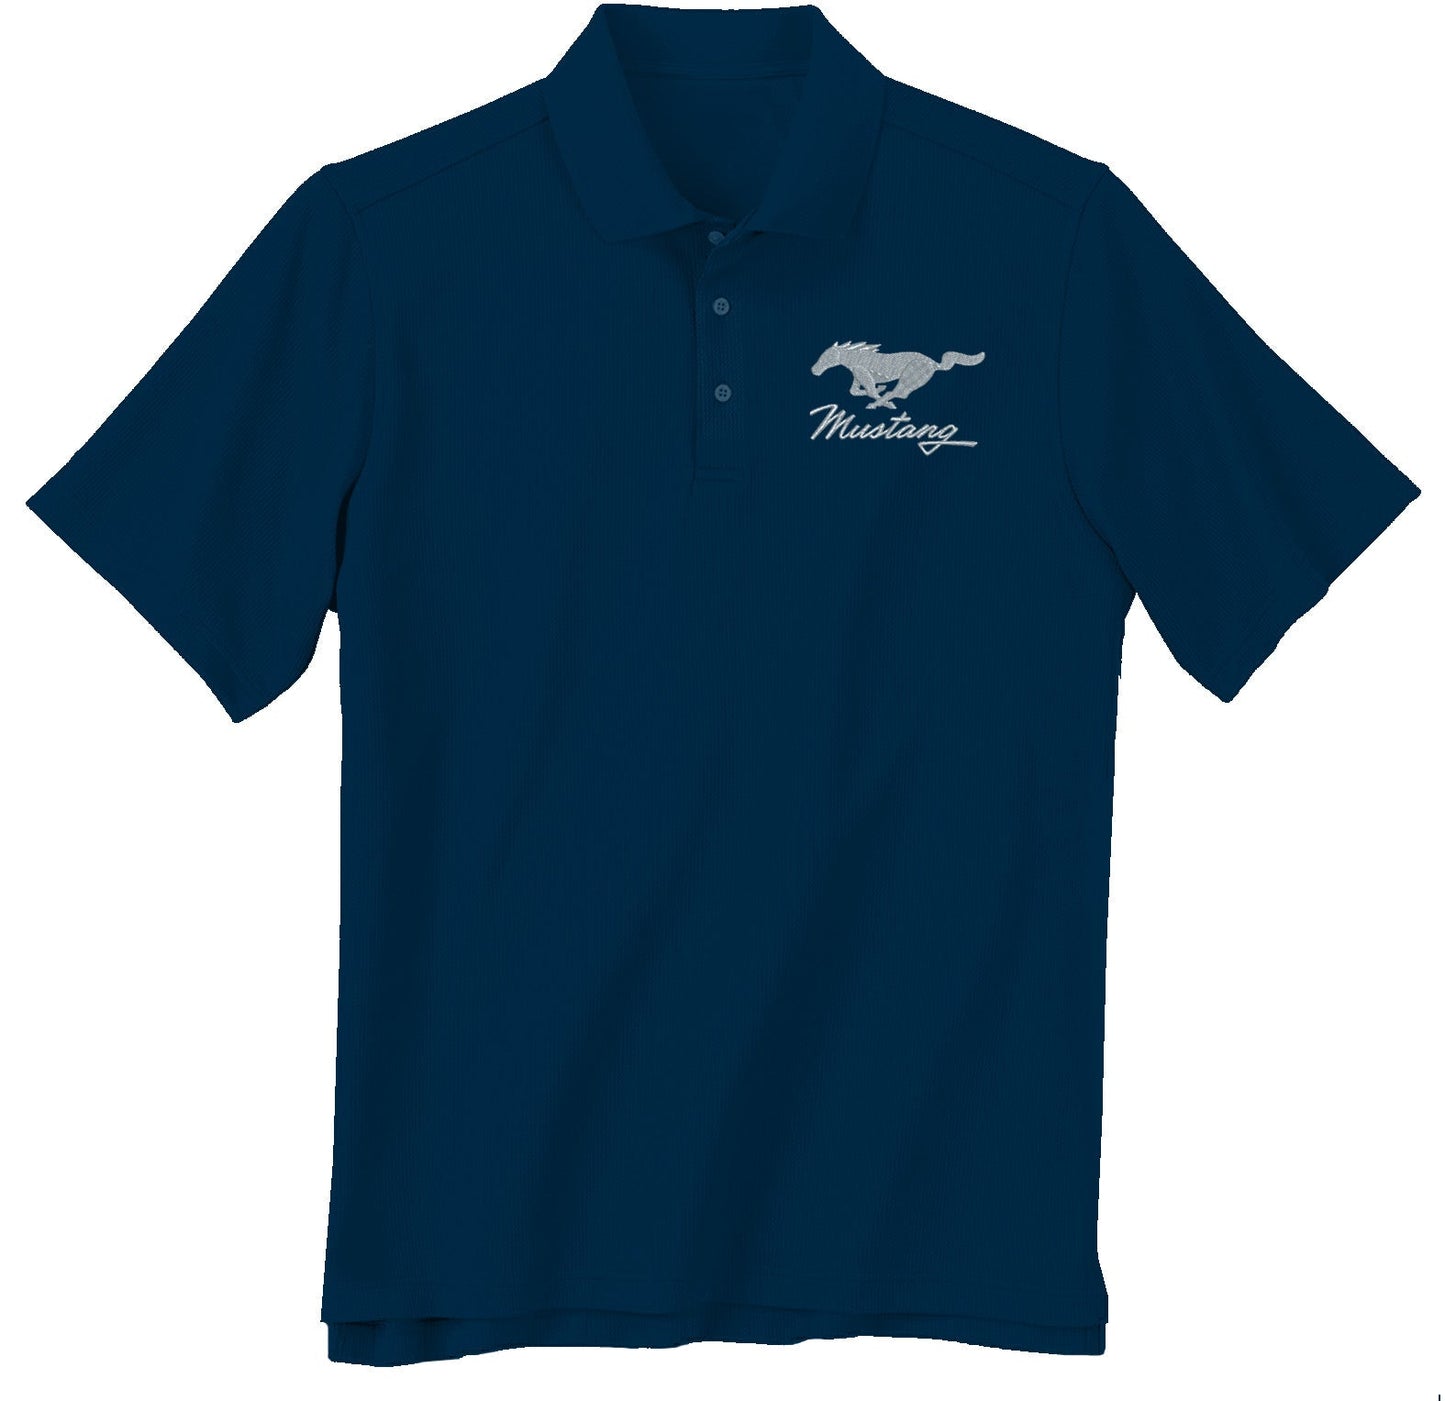 Ford Mustang Running Horse Pony Blue Polo Collared Shirt 100% Polyester - 2X